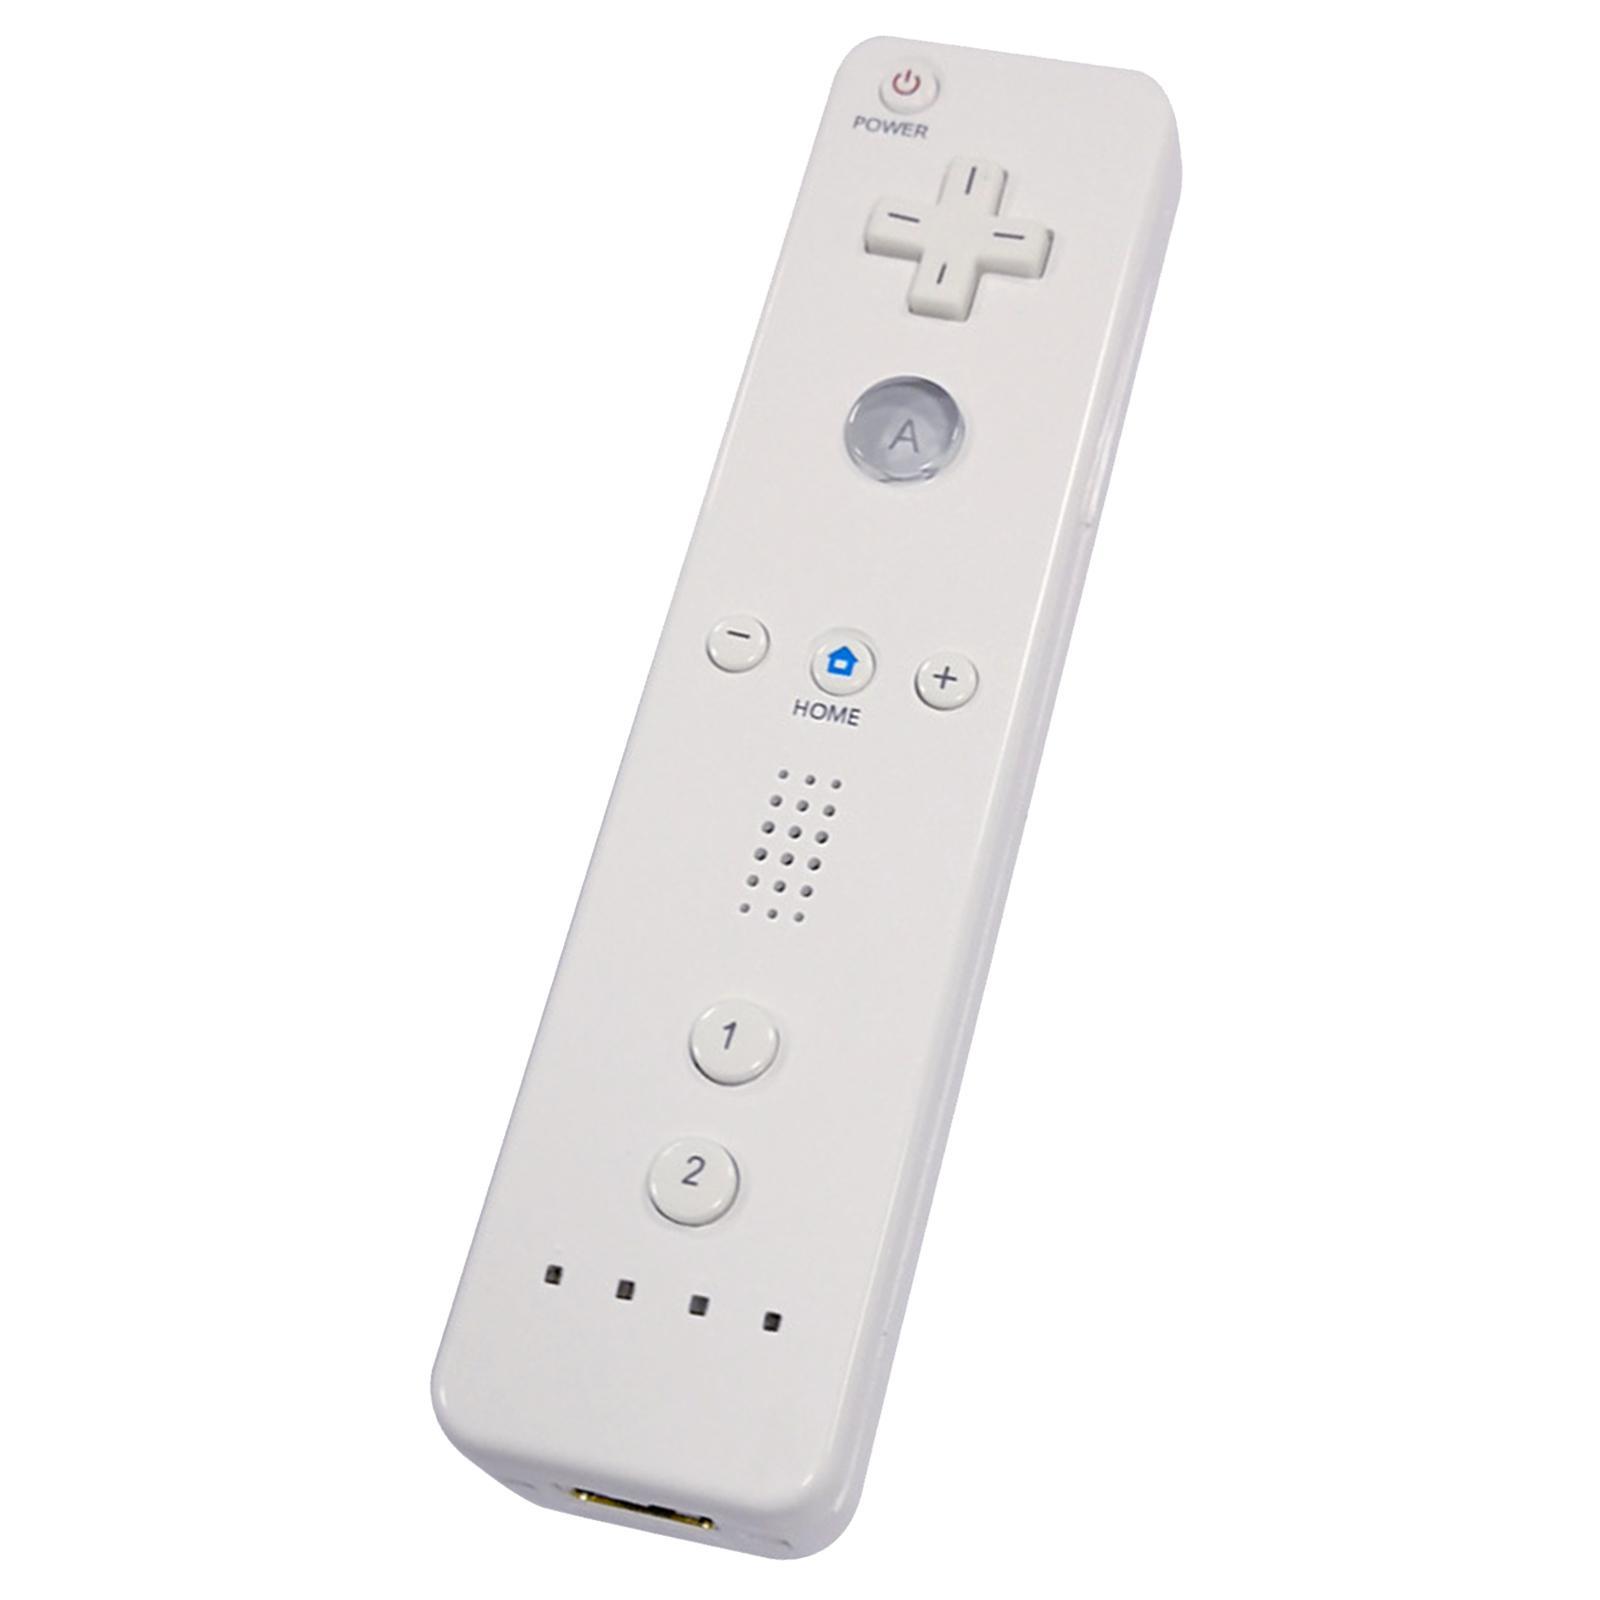 Remote Controller with Wrist Strap for   and